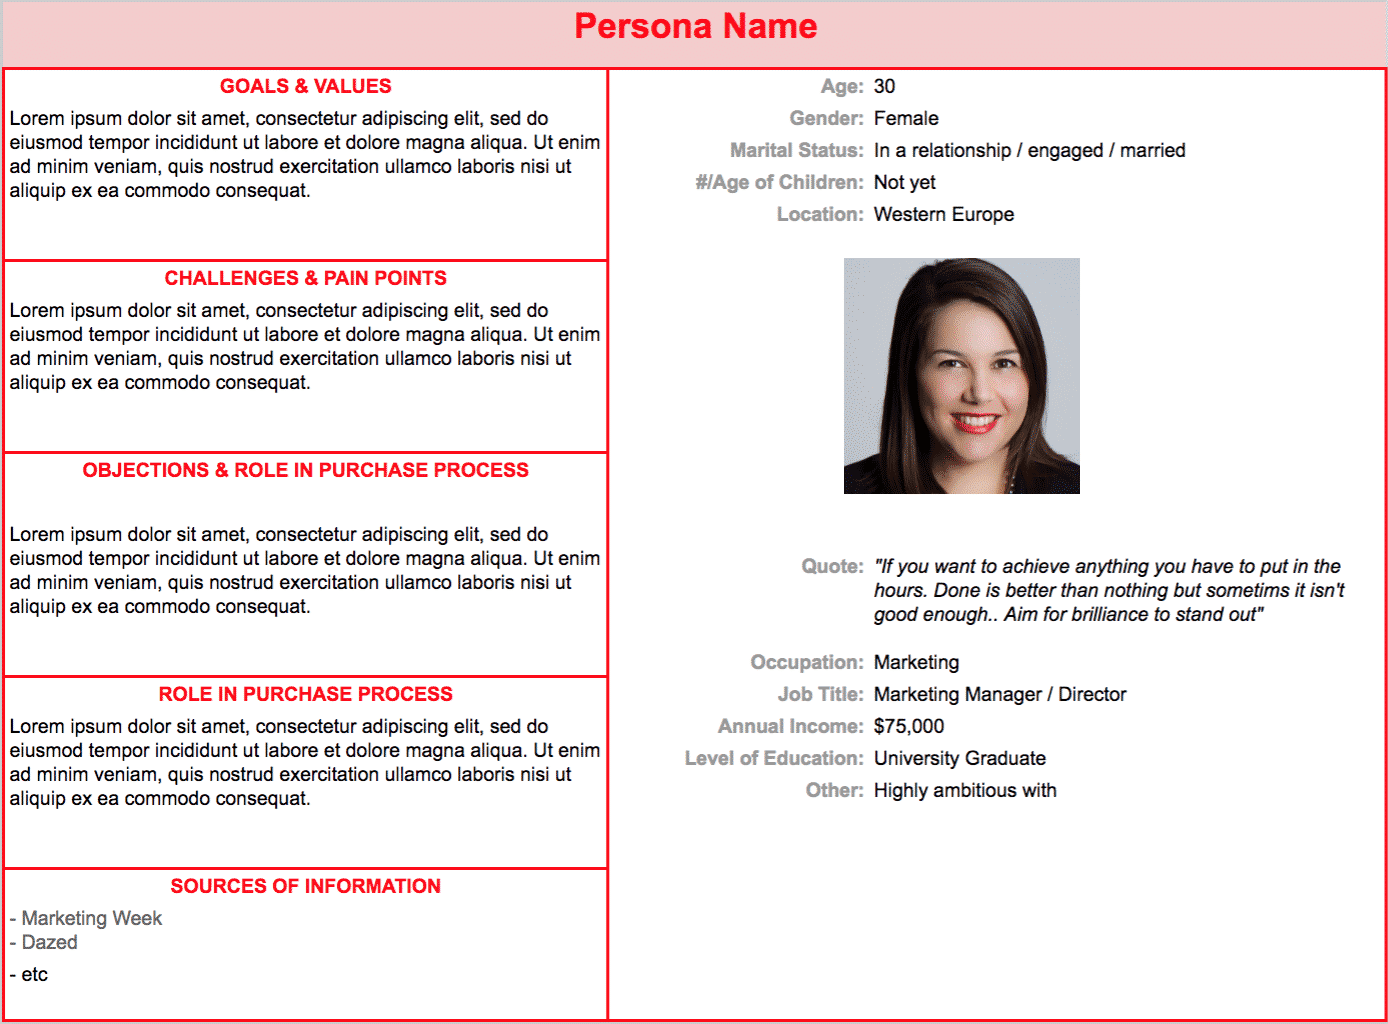 Customer Persona Research for Marketing Automation